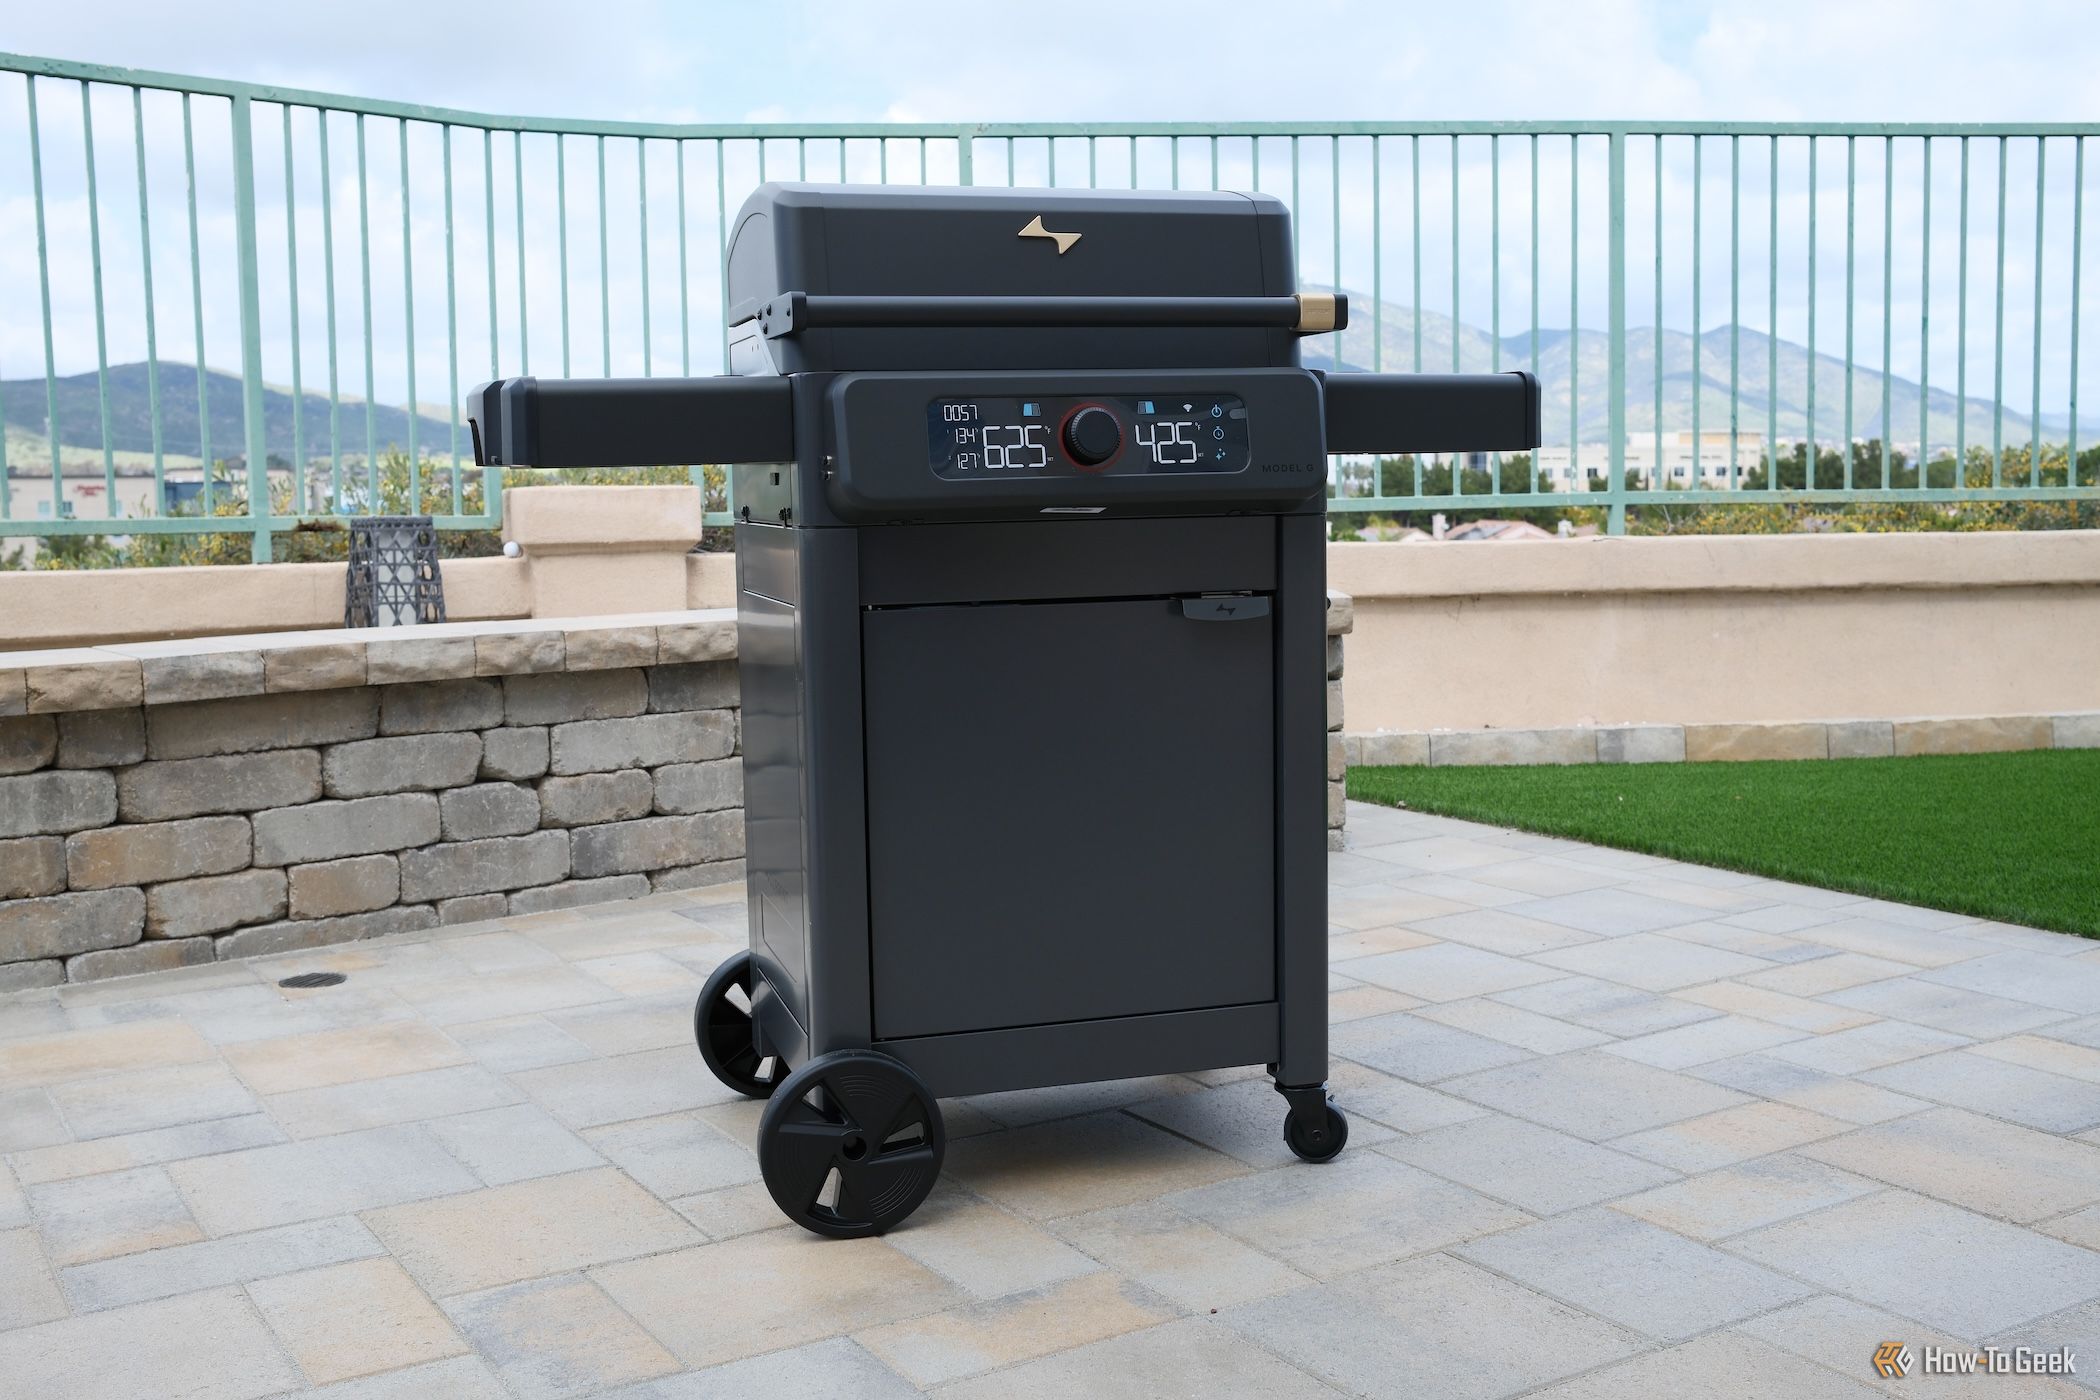 The front of the Current Model G Dual Zone Grill with the lid closed